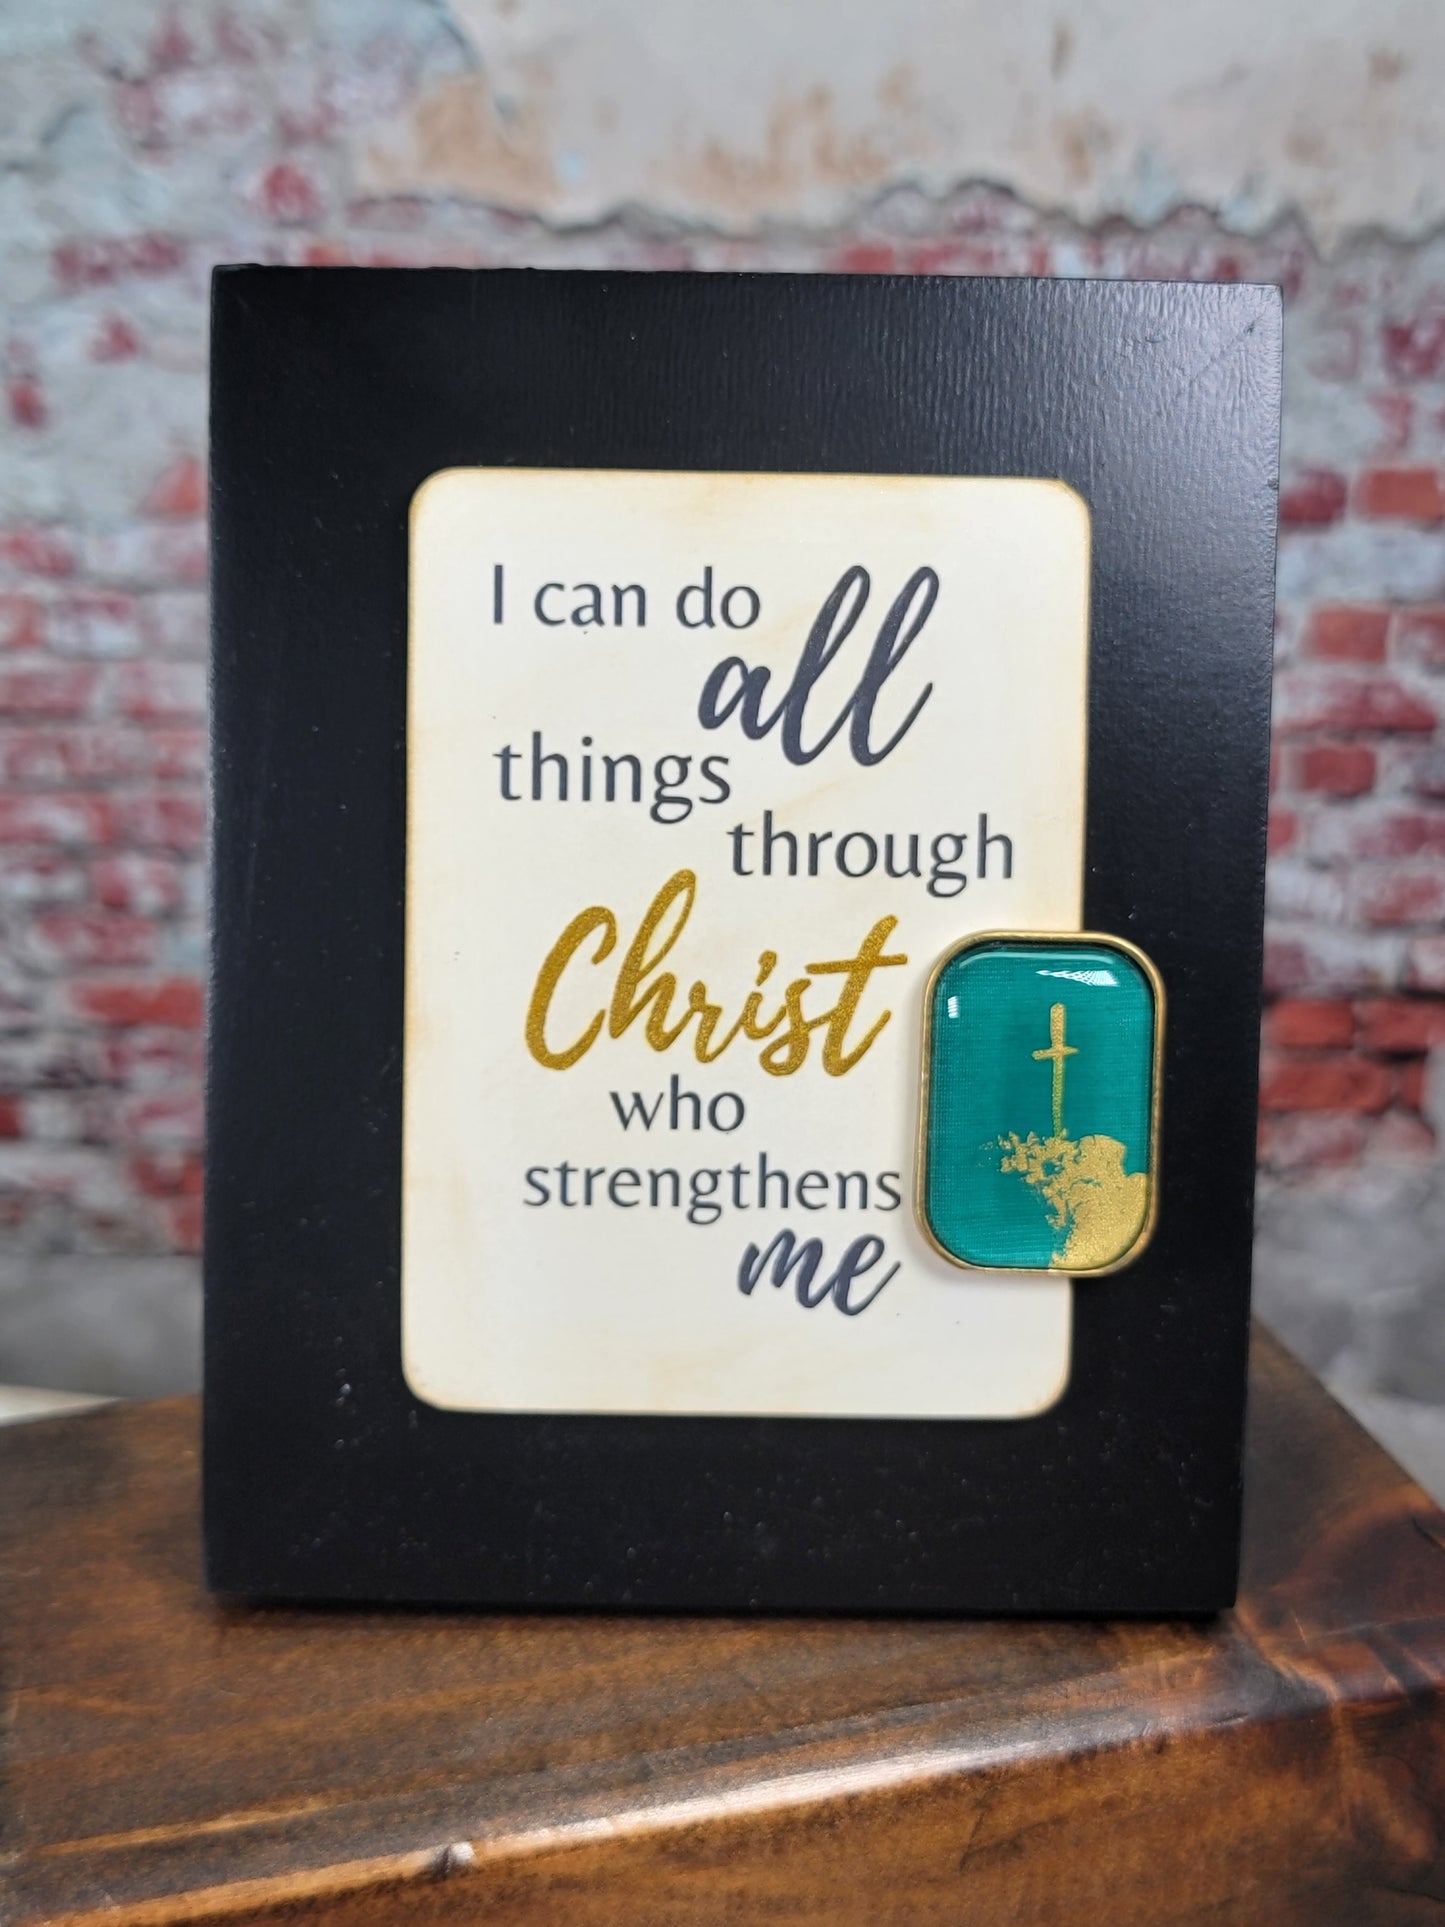 I can do all things through Christ who strengthens me - Mini Frame